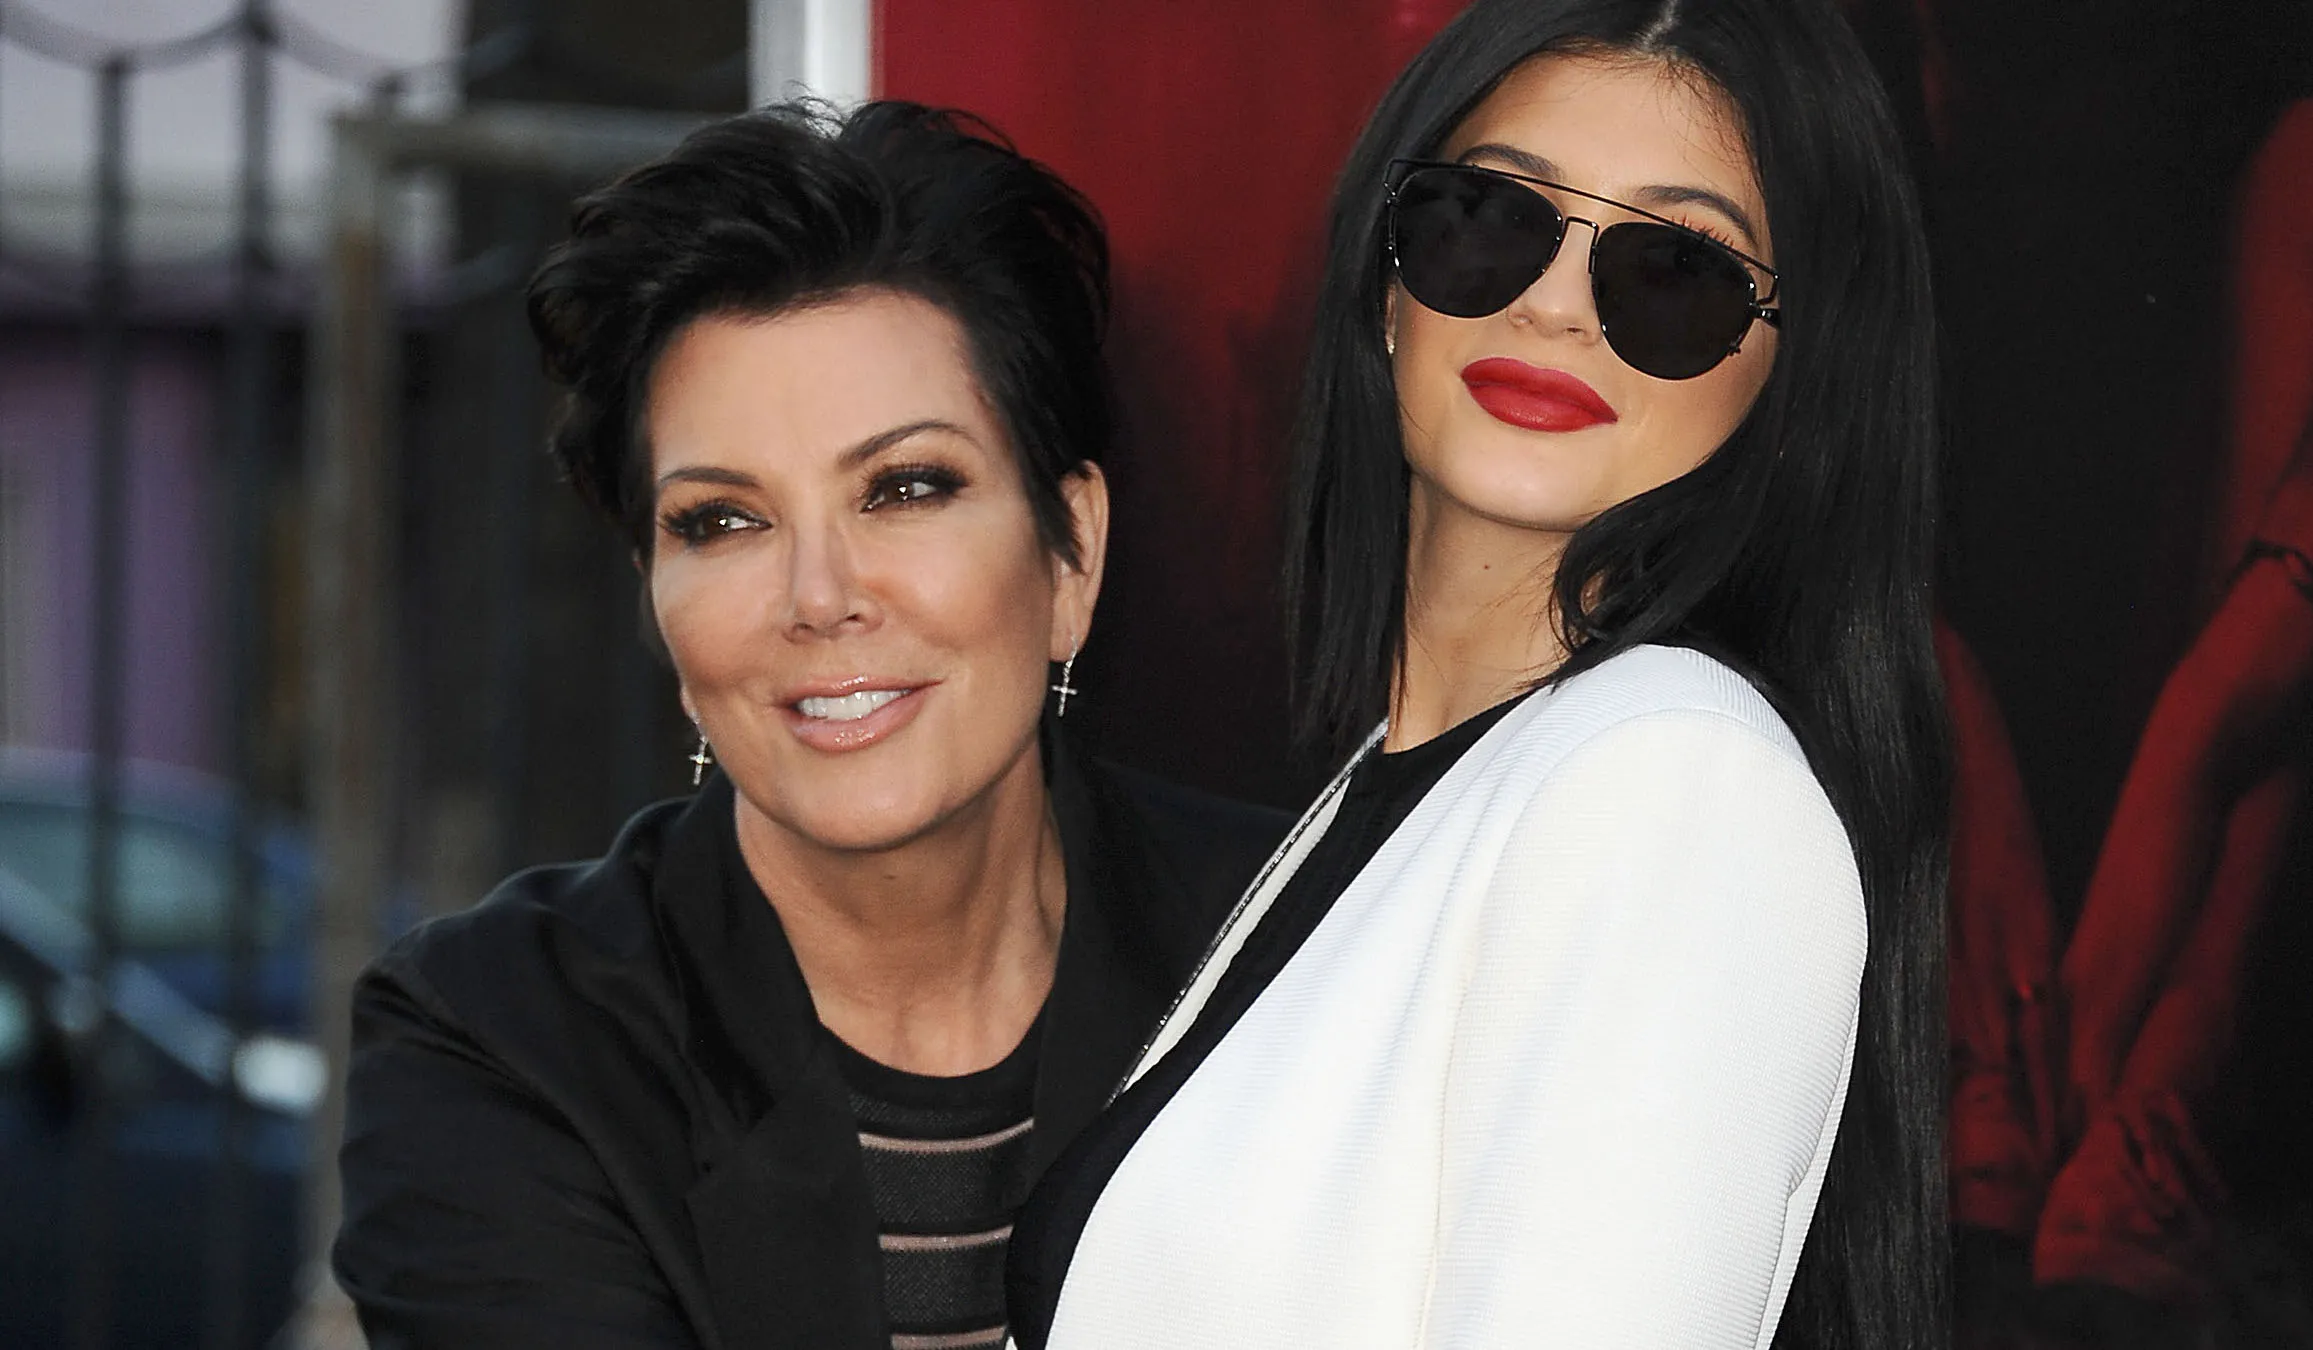 Kylie Jenner and Kris Jenner